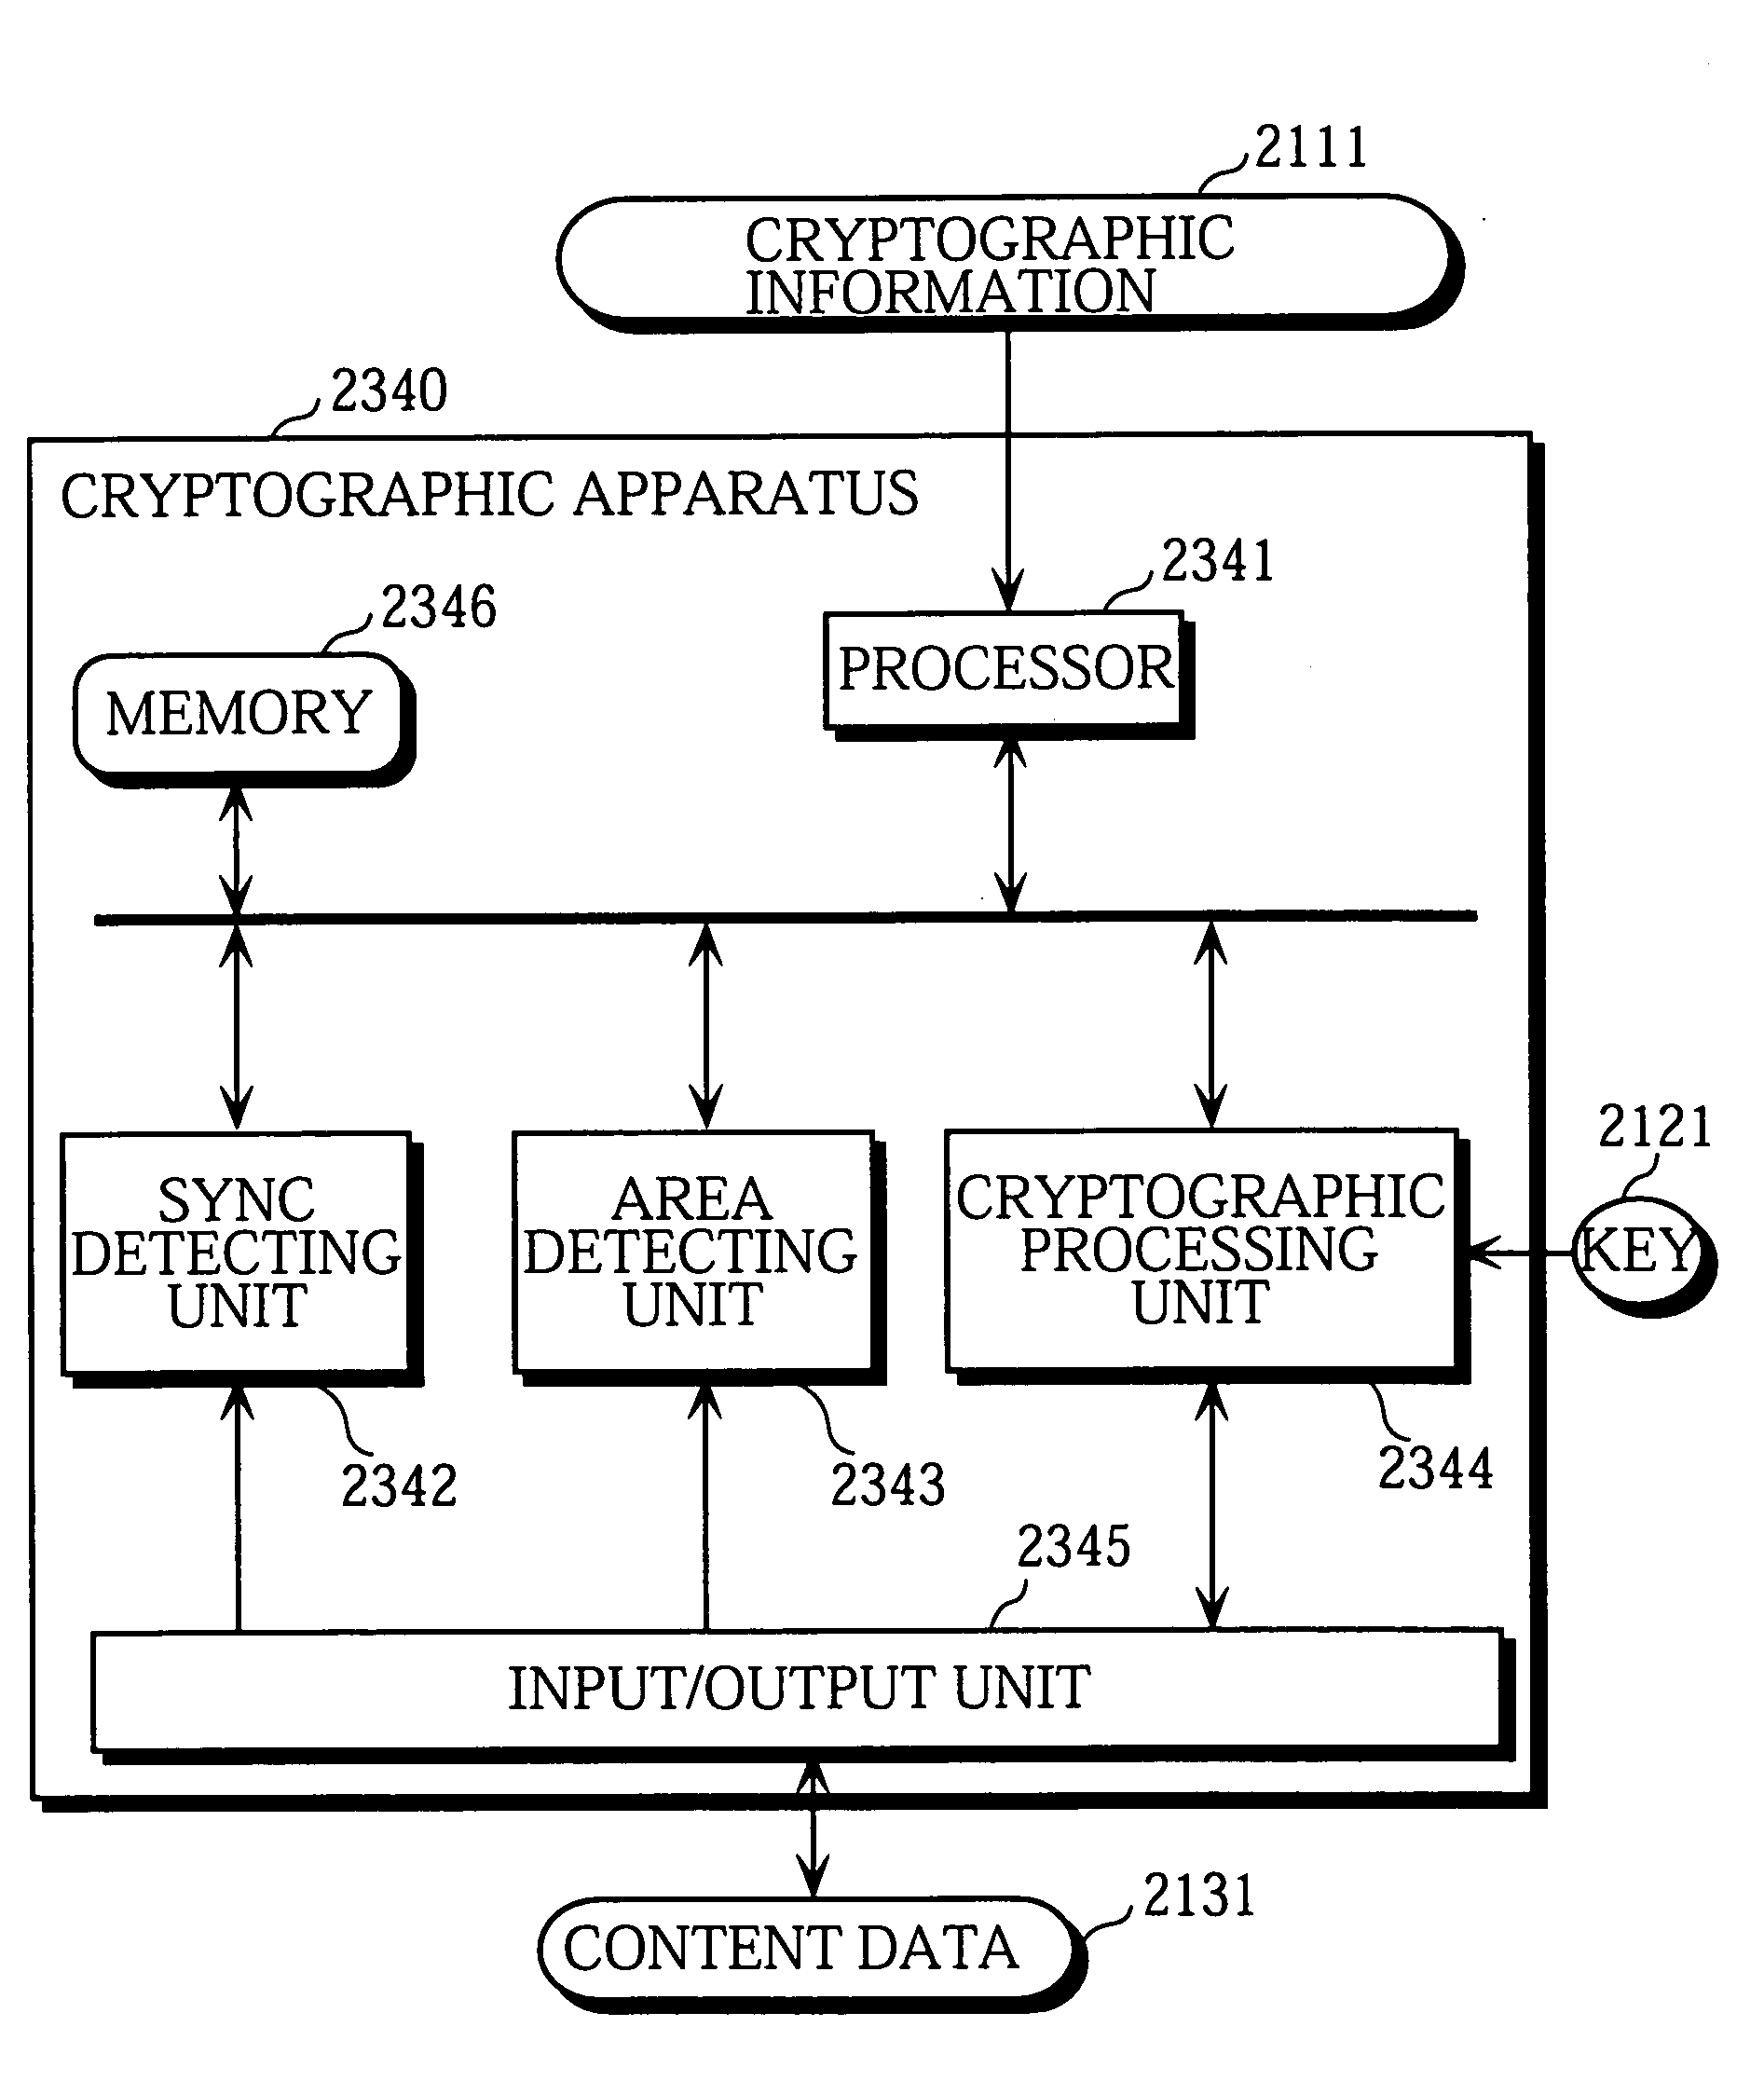 Cryptographic apparatus for performing cryptography on a specified area of content data